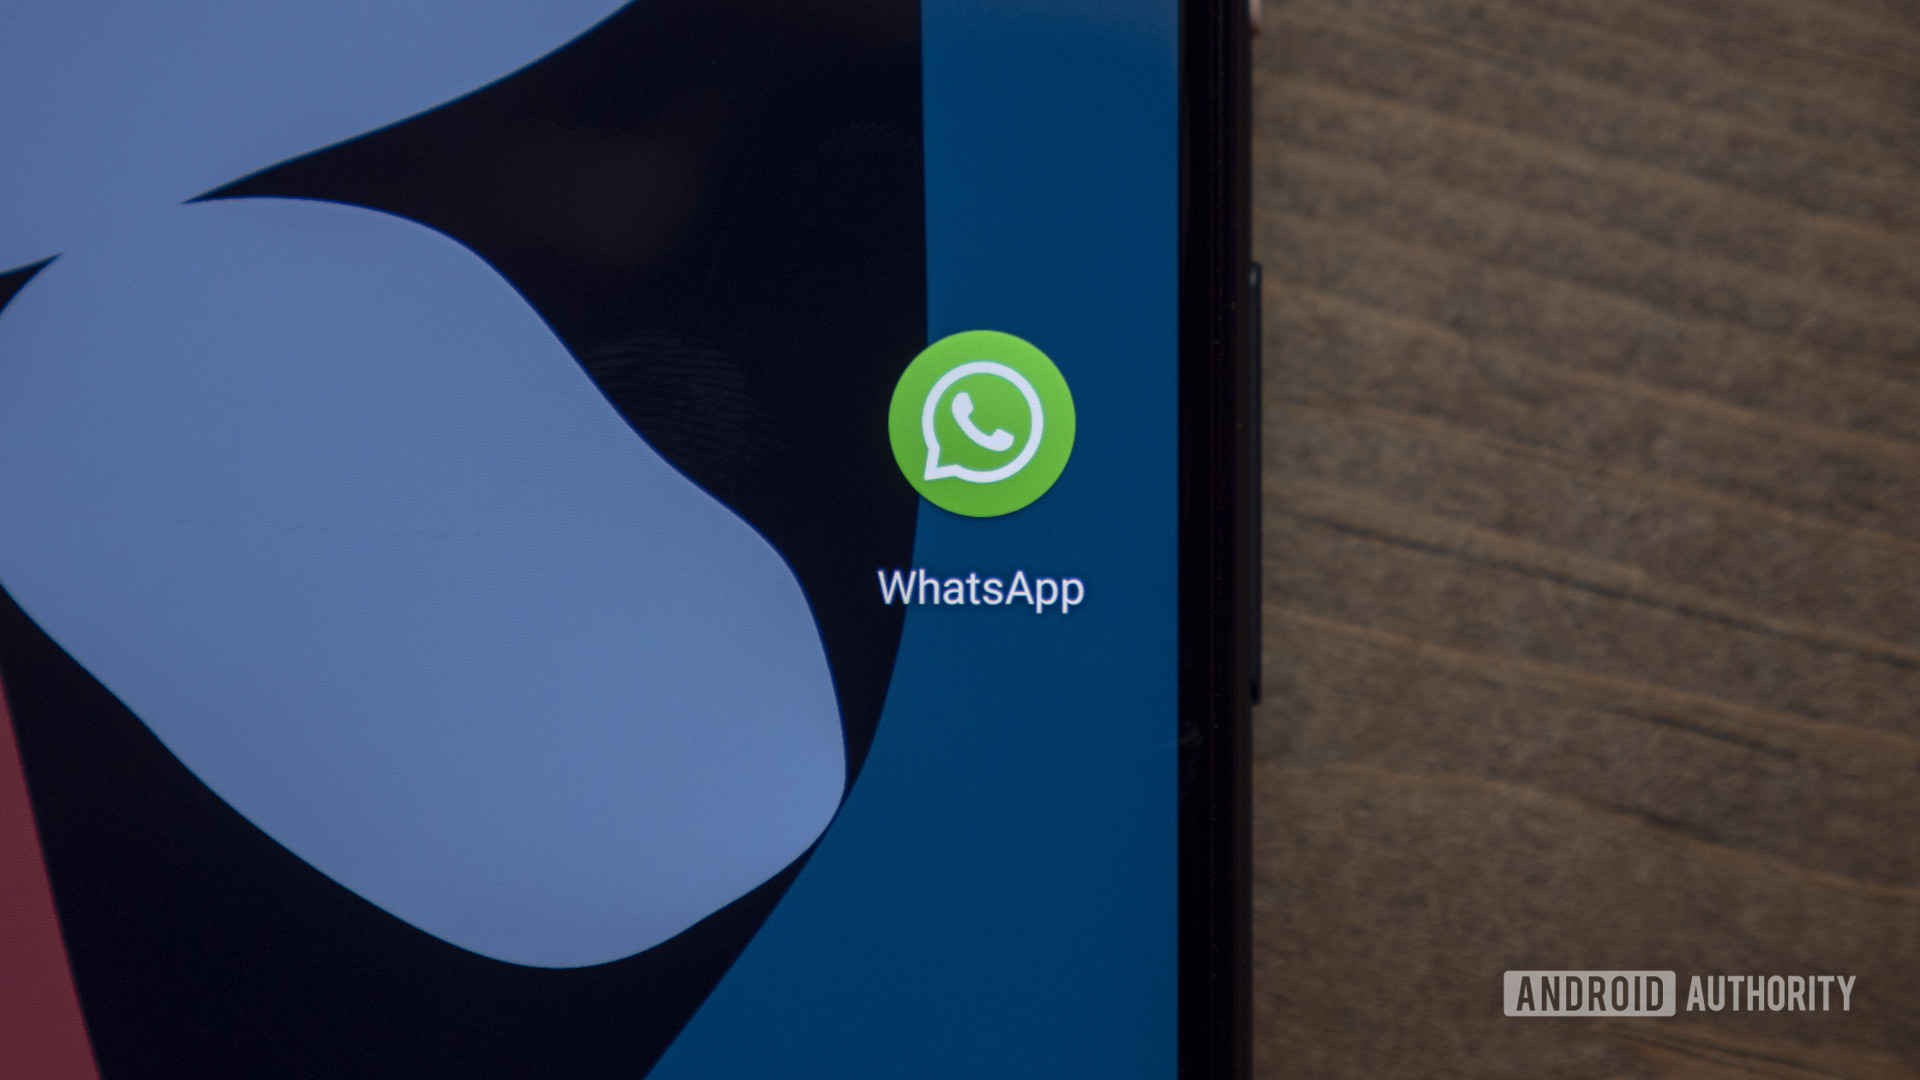 Family tech support gets easier: Screen sharing comes to WhatsApp video calls